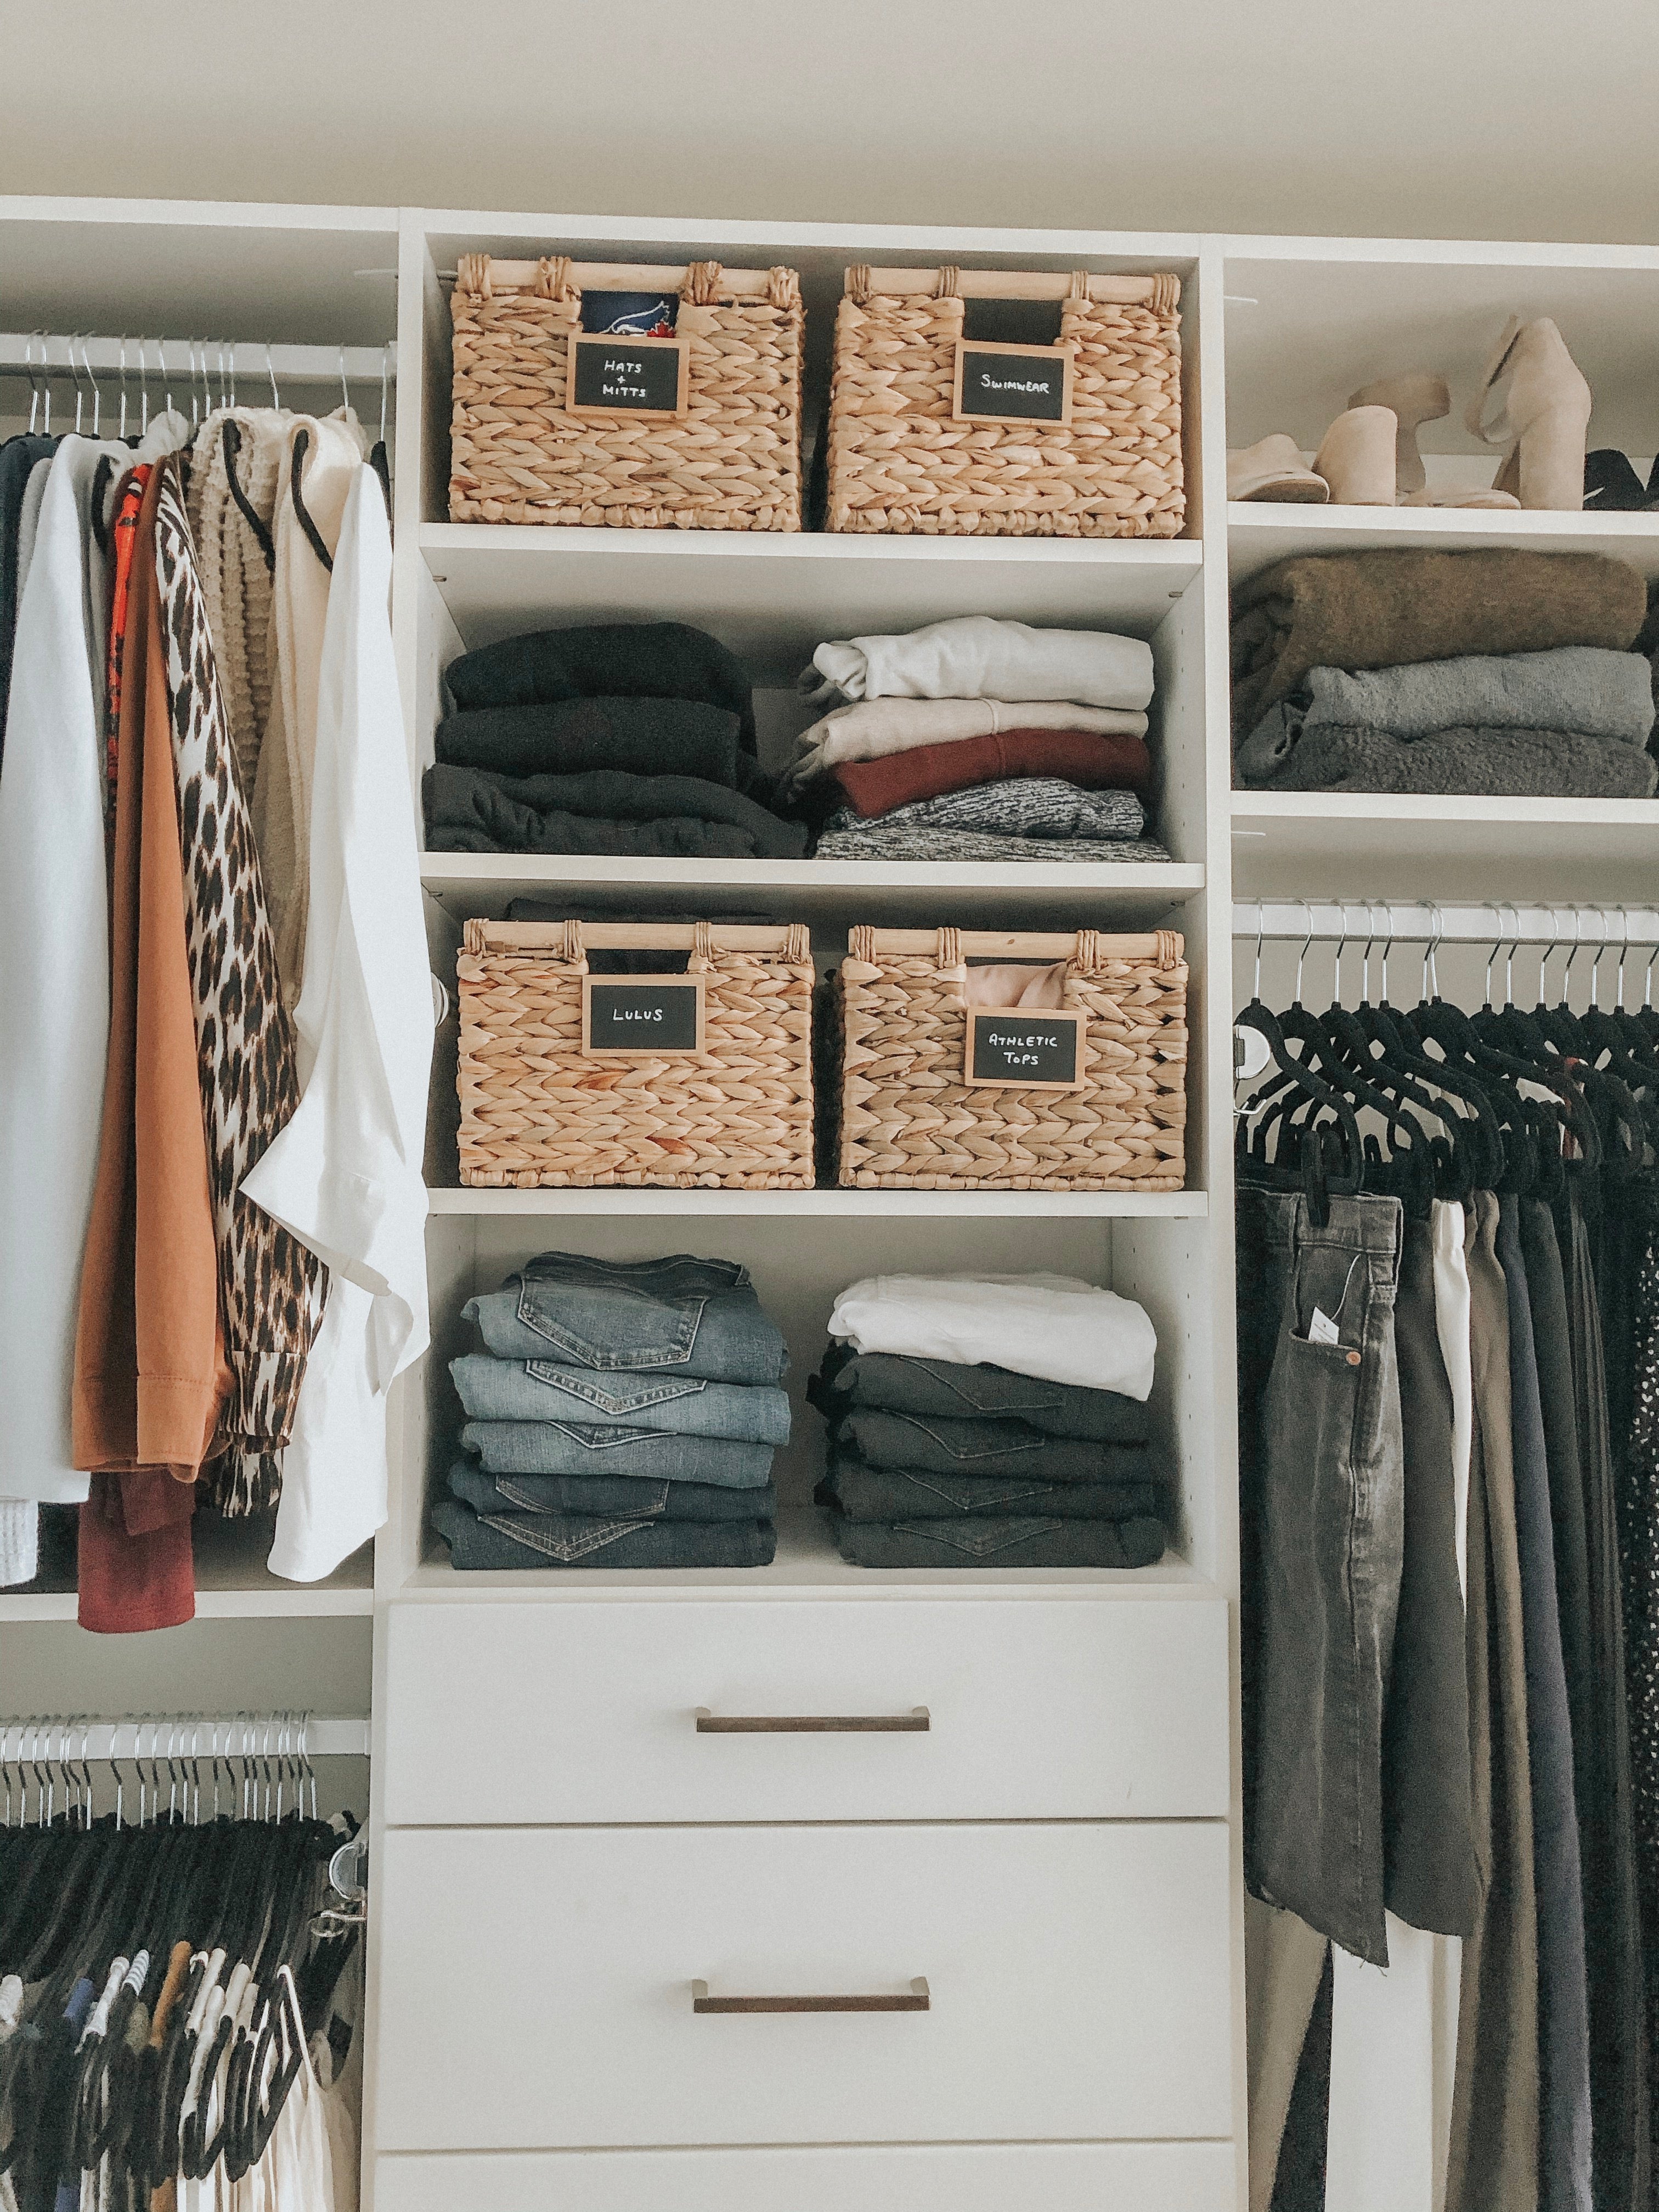 Prepping Your Home for an Organized Move